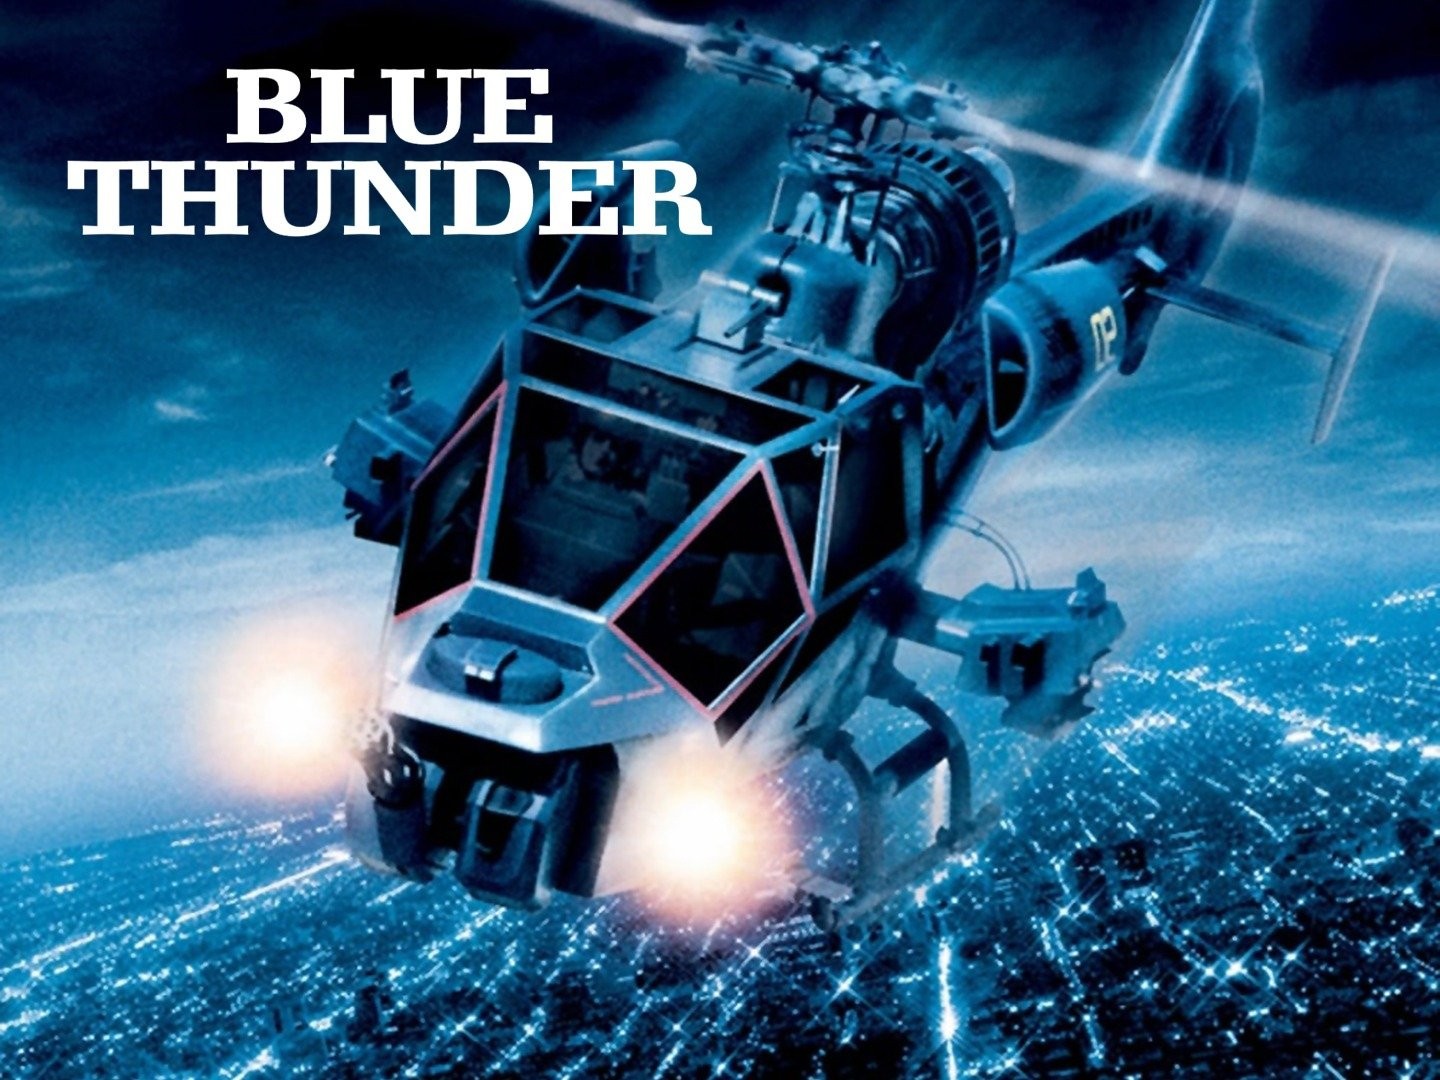 Blue Thunder: the end of the famous helicopter from the movie and